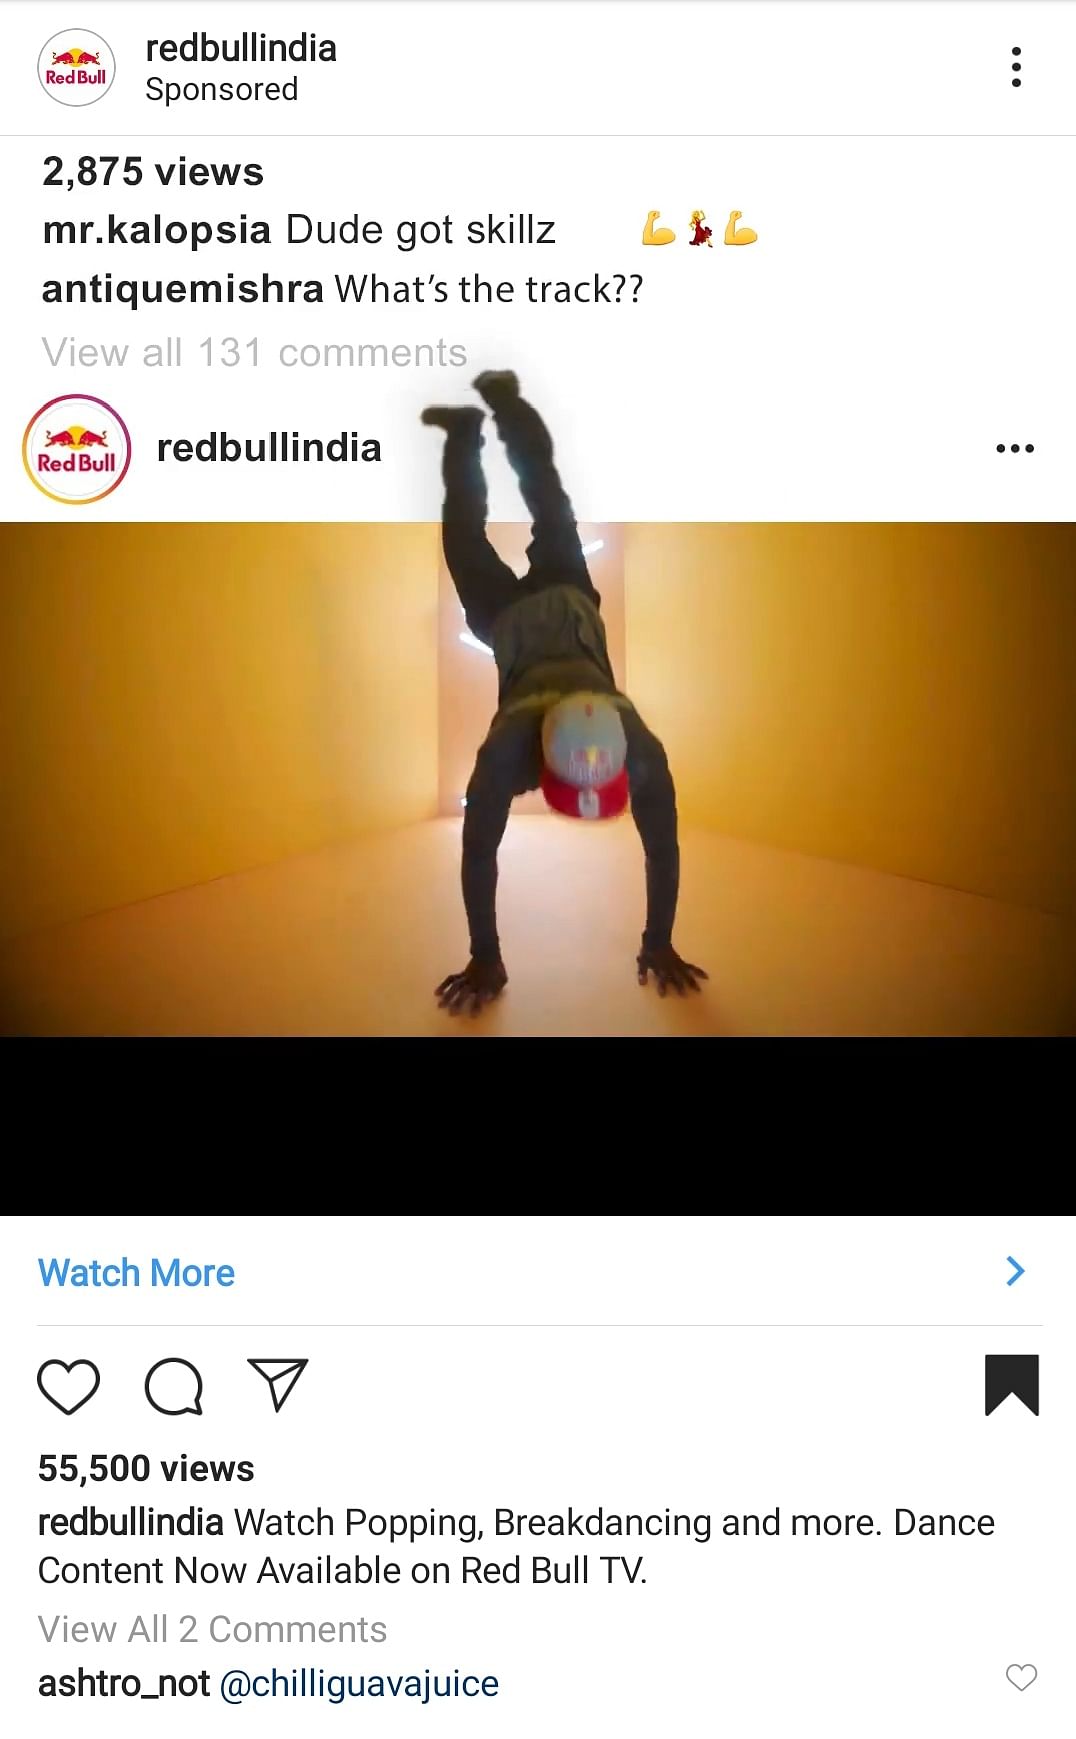 An ad for Red Bull that appears to spill over the feed